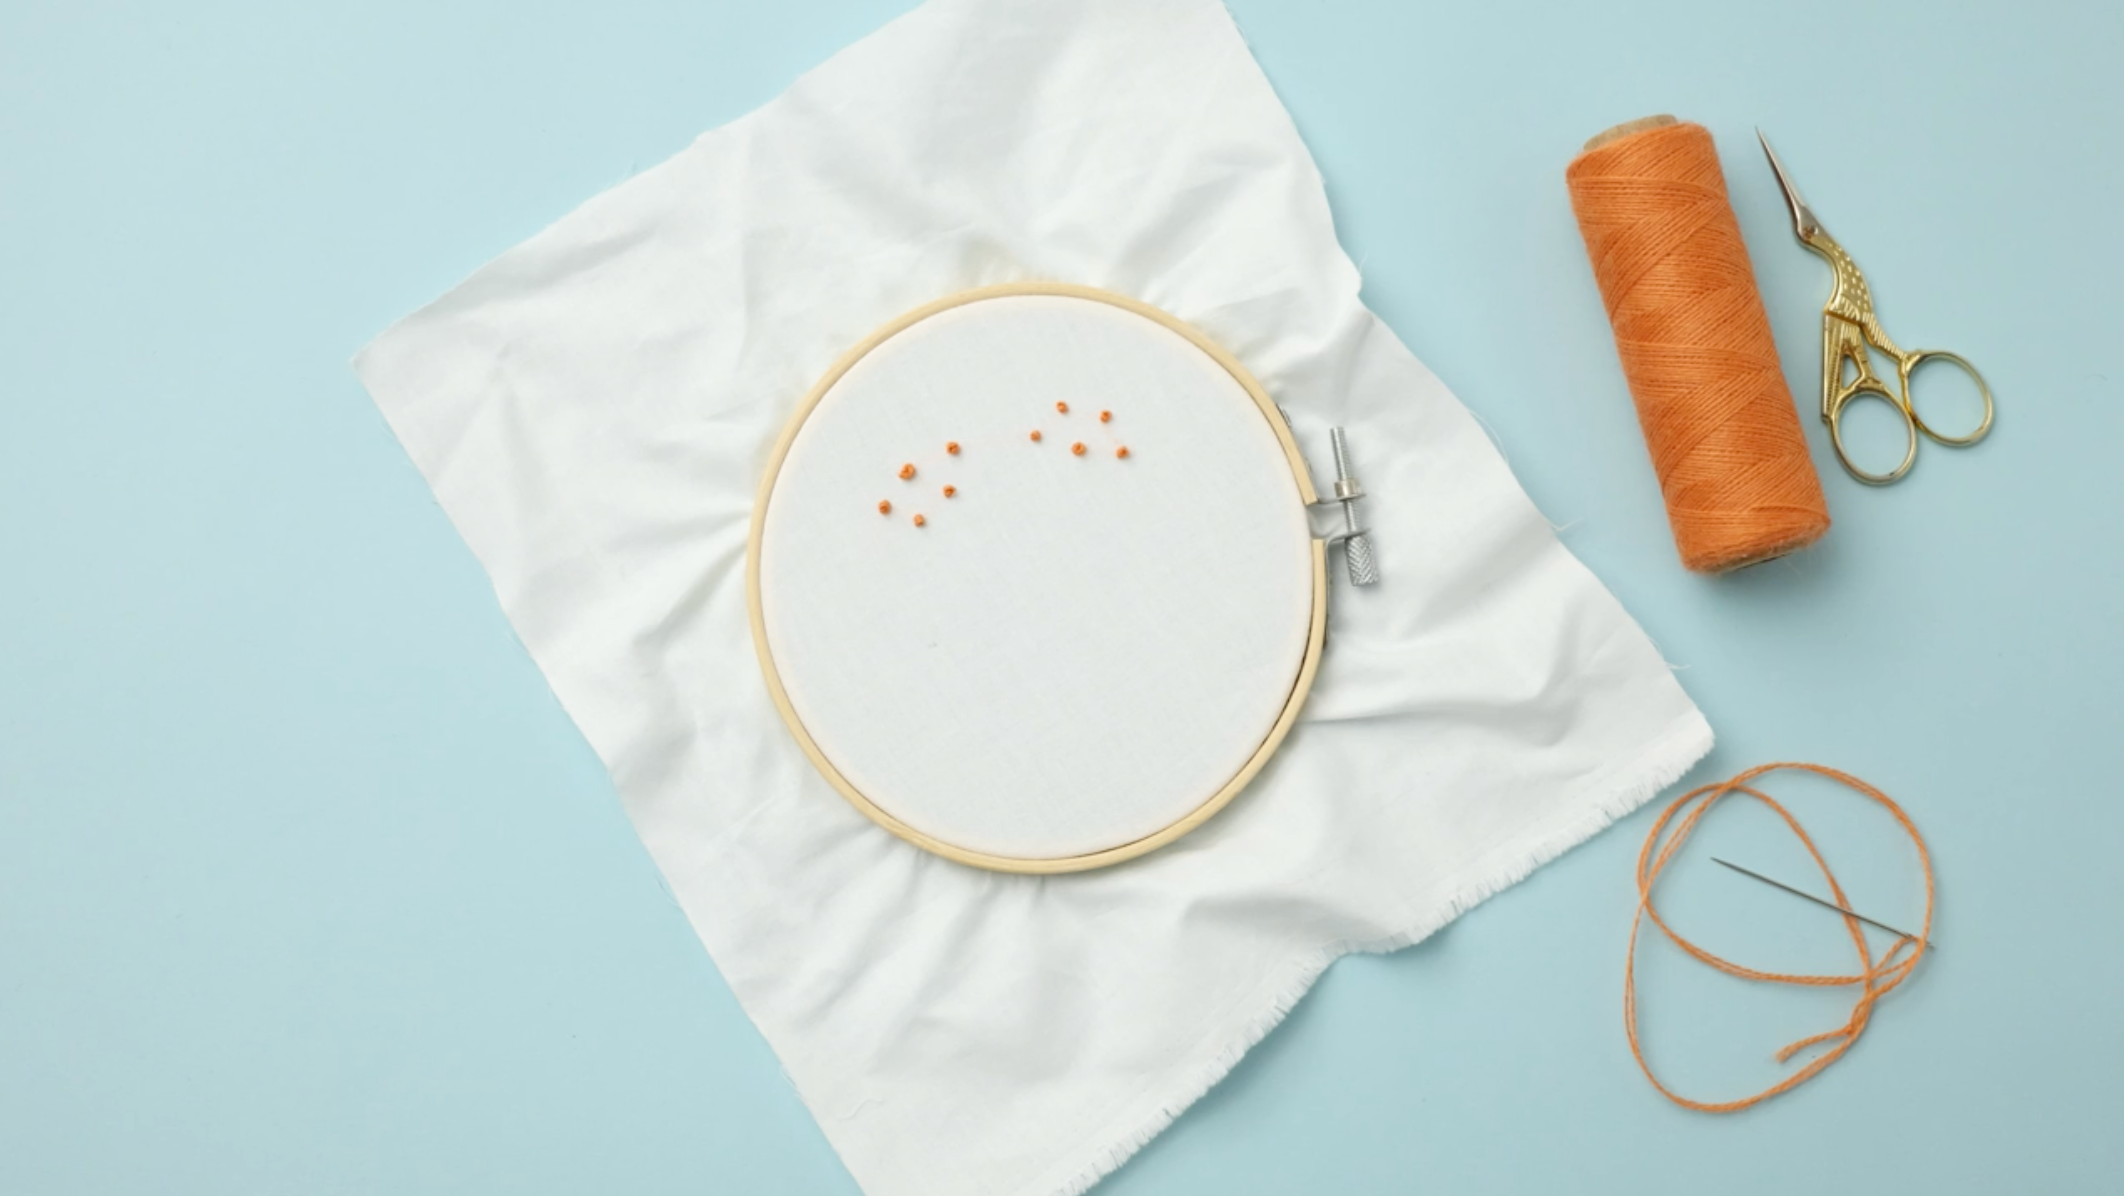 embroidered french knot examples